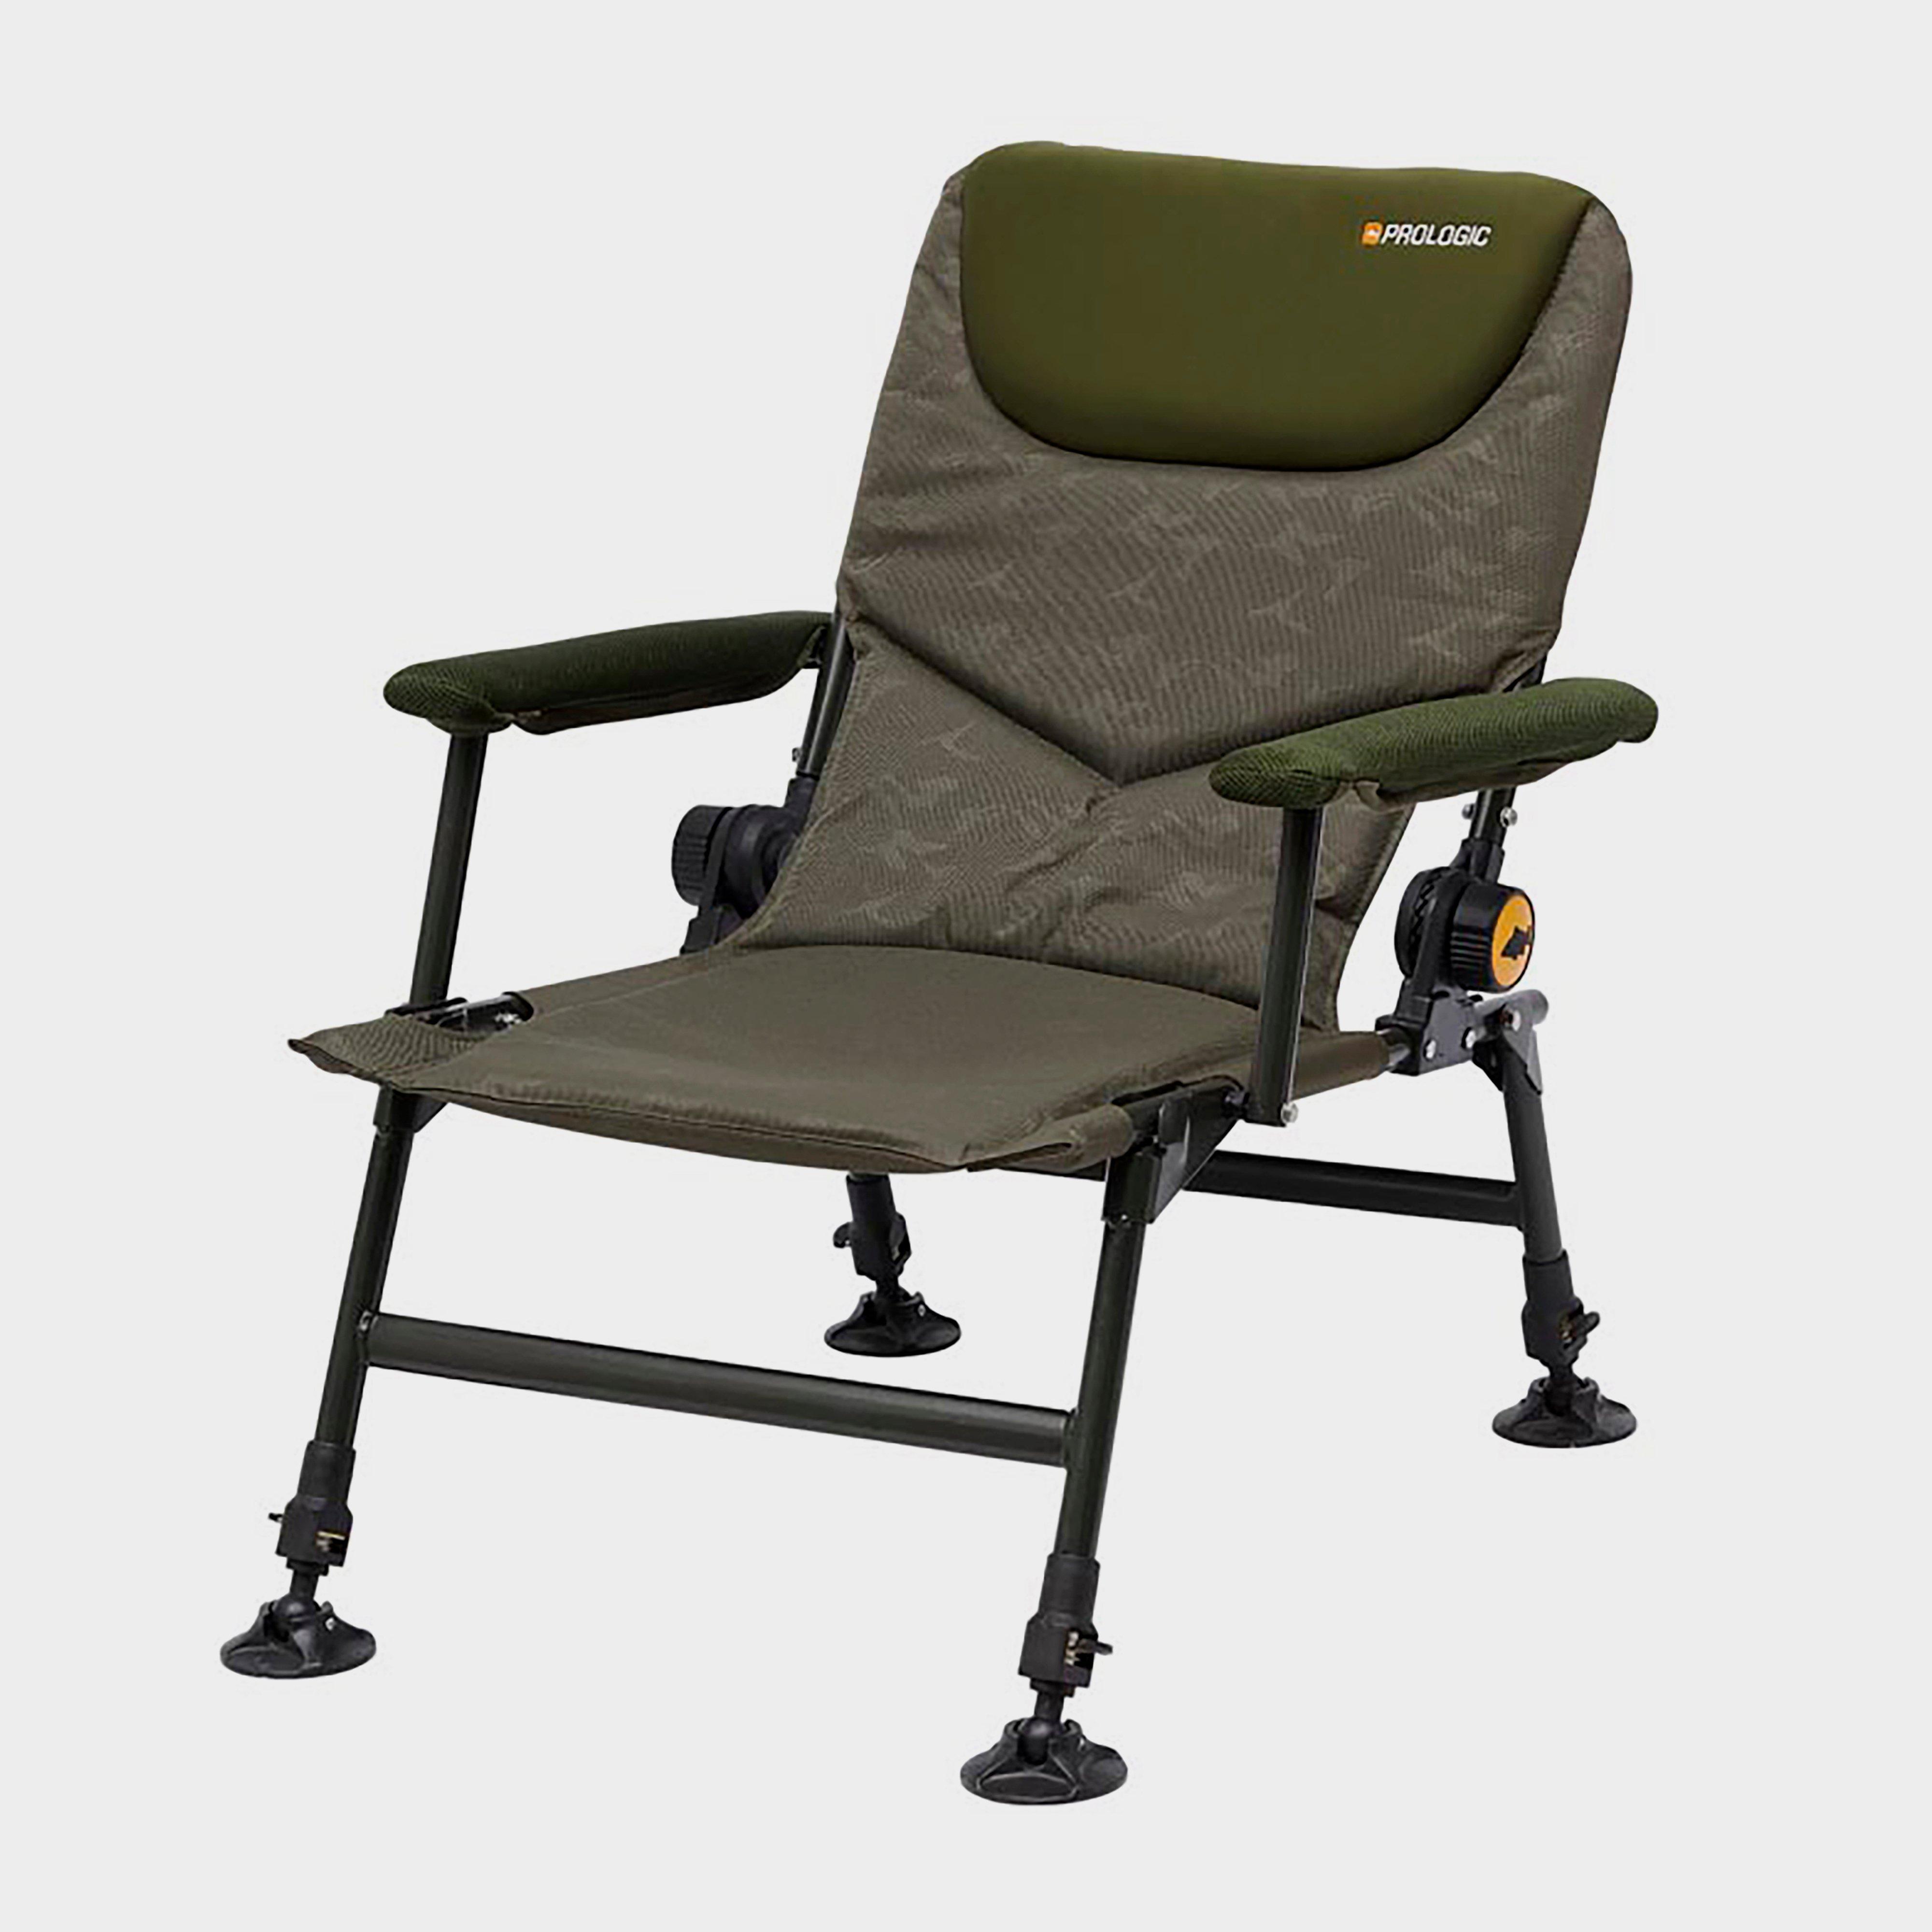  PROLOGIC Inspire Lite-Pro Recliner Chair with Armrests, Green